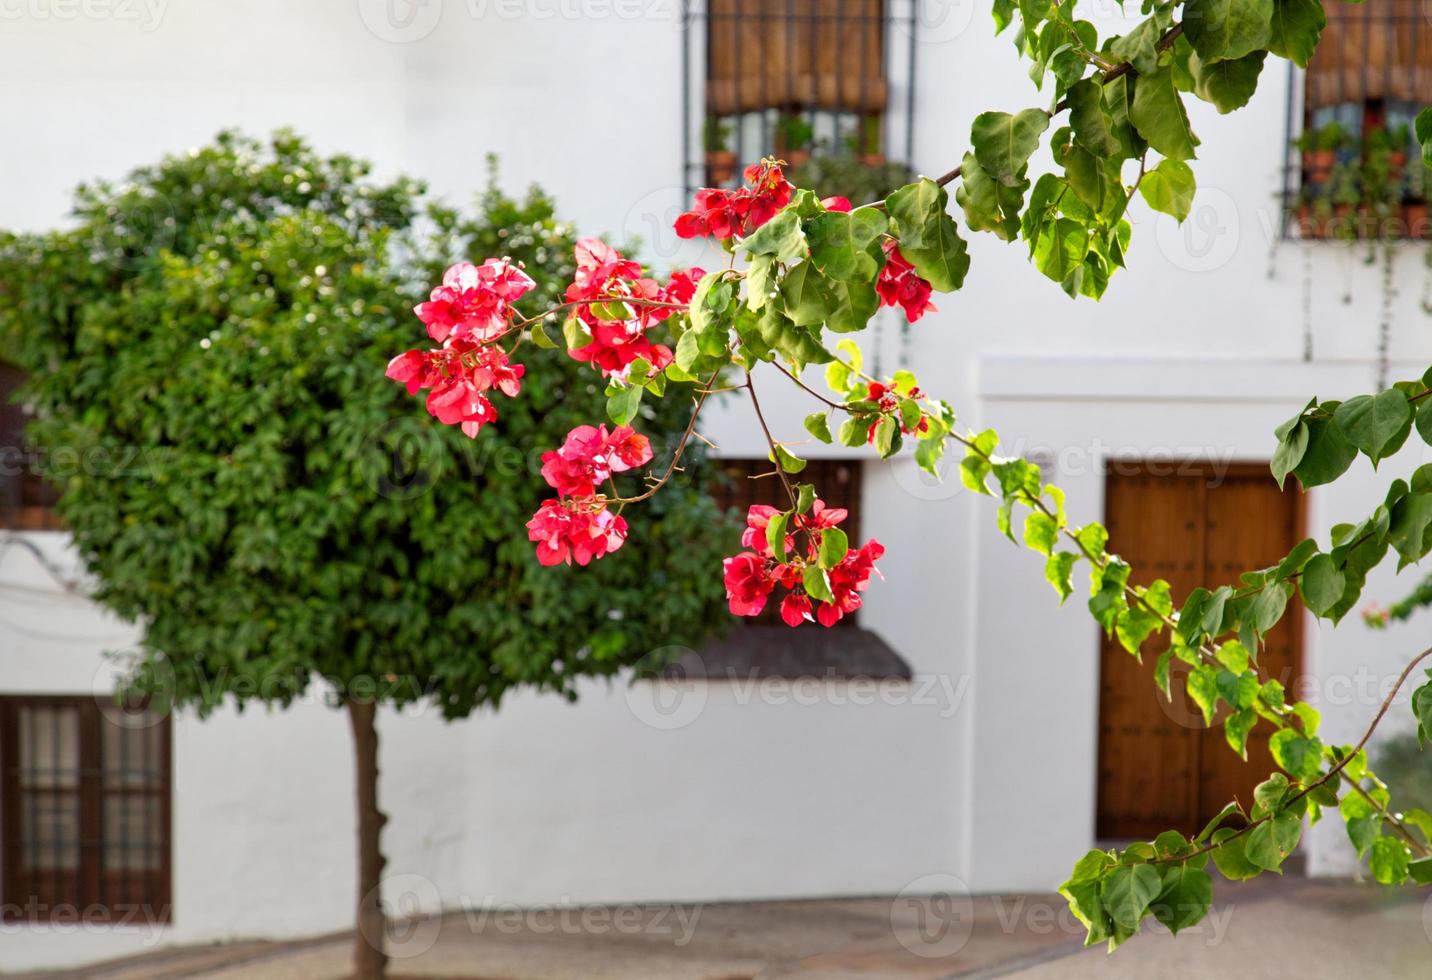 Cordoba streets on a sunny day in historic city center photo